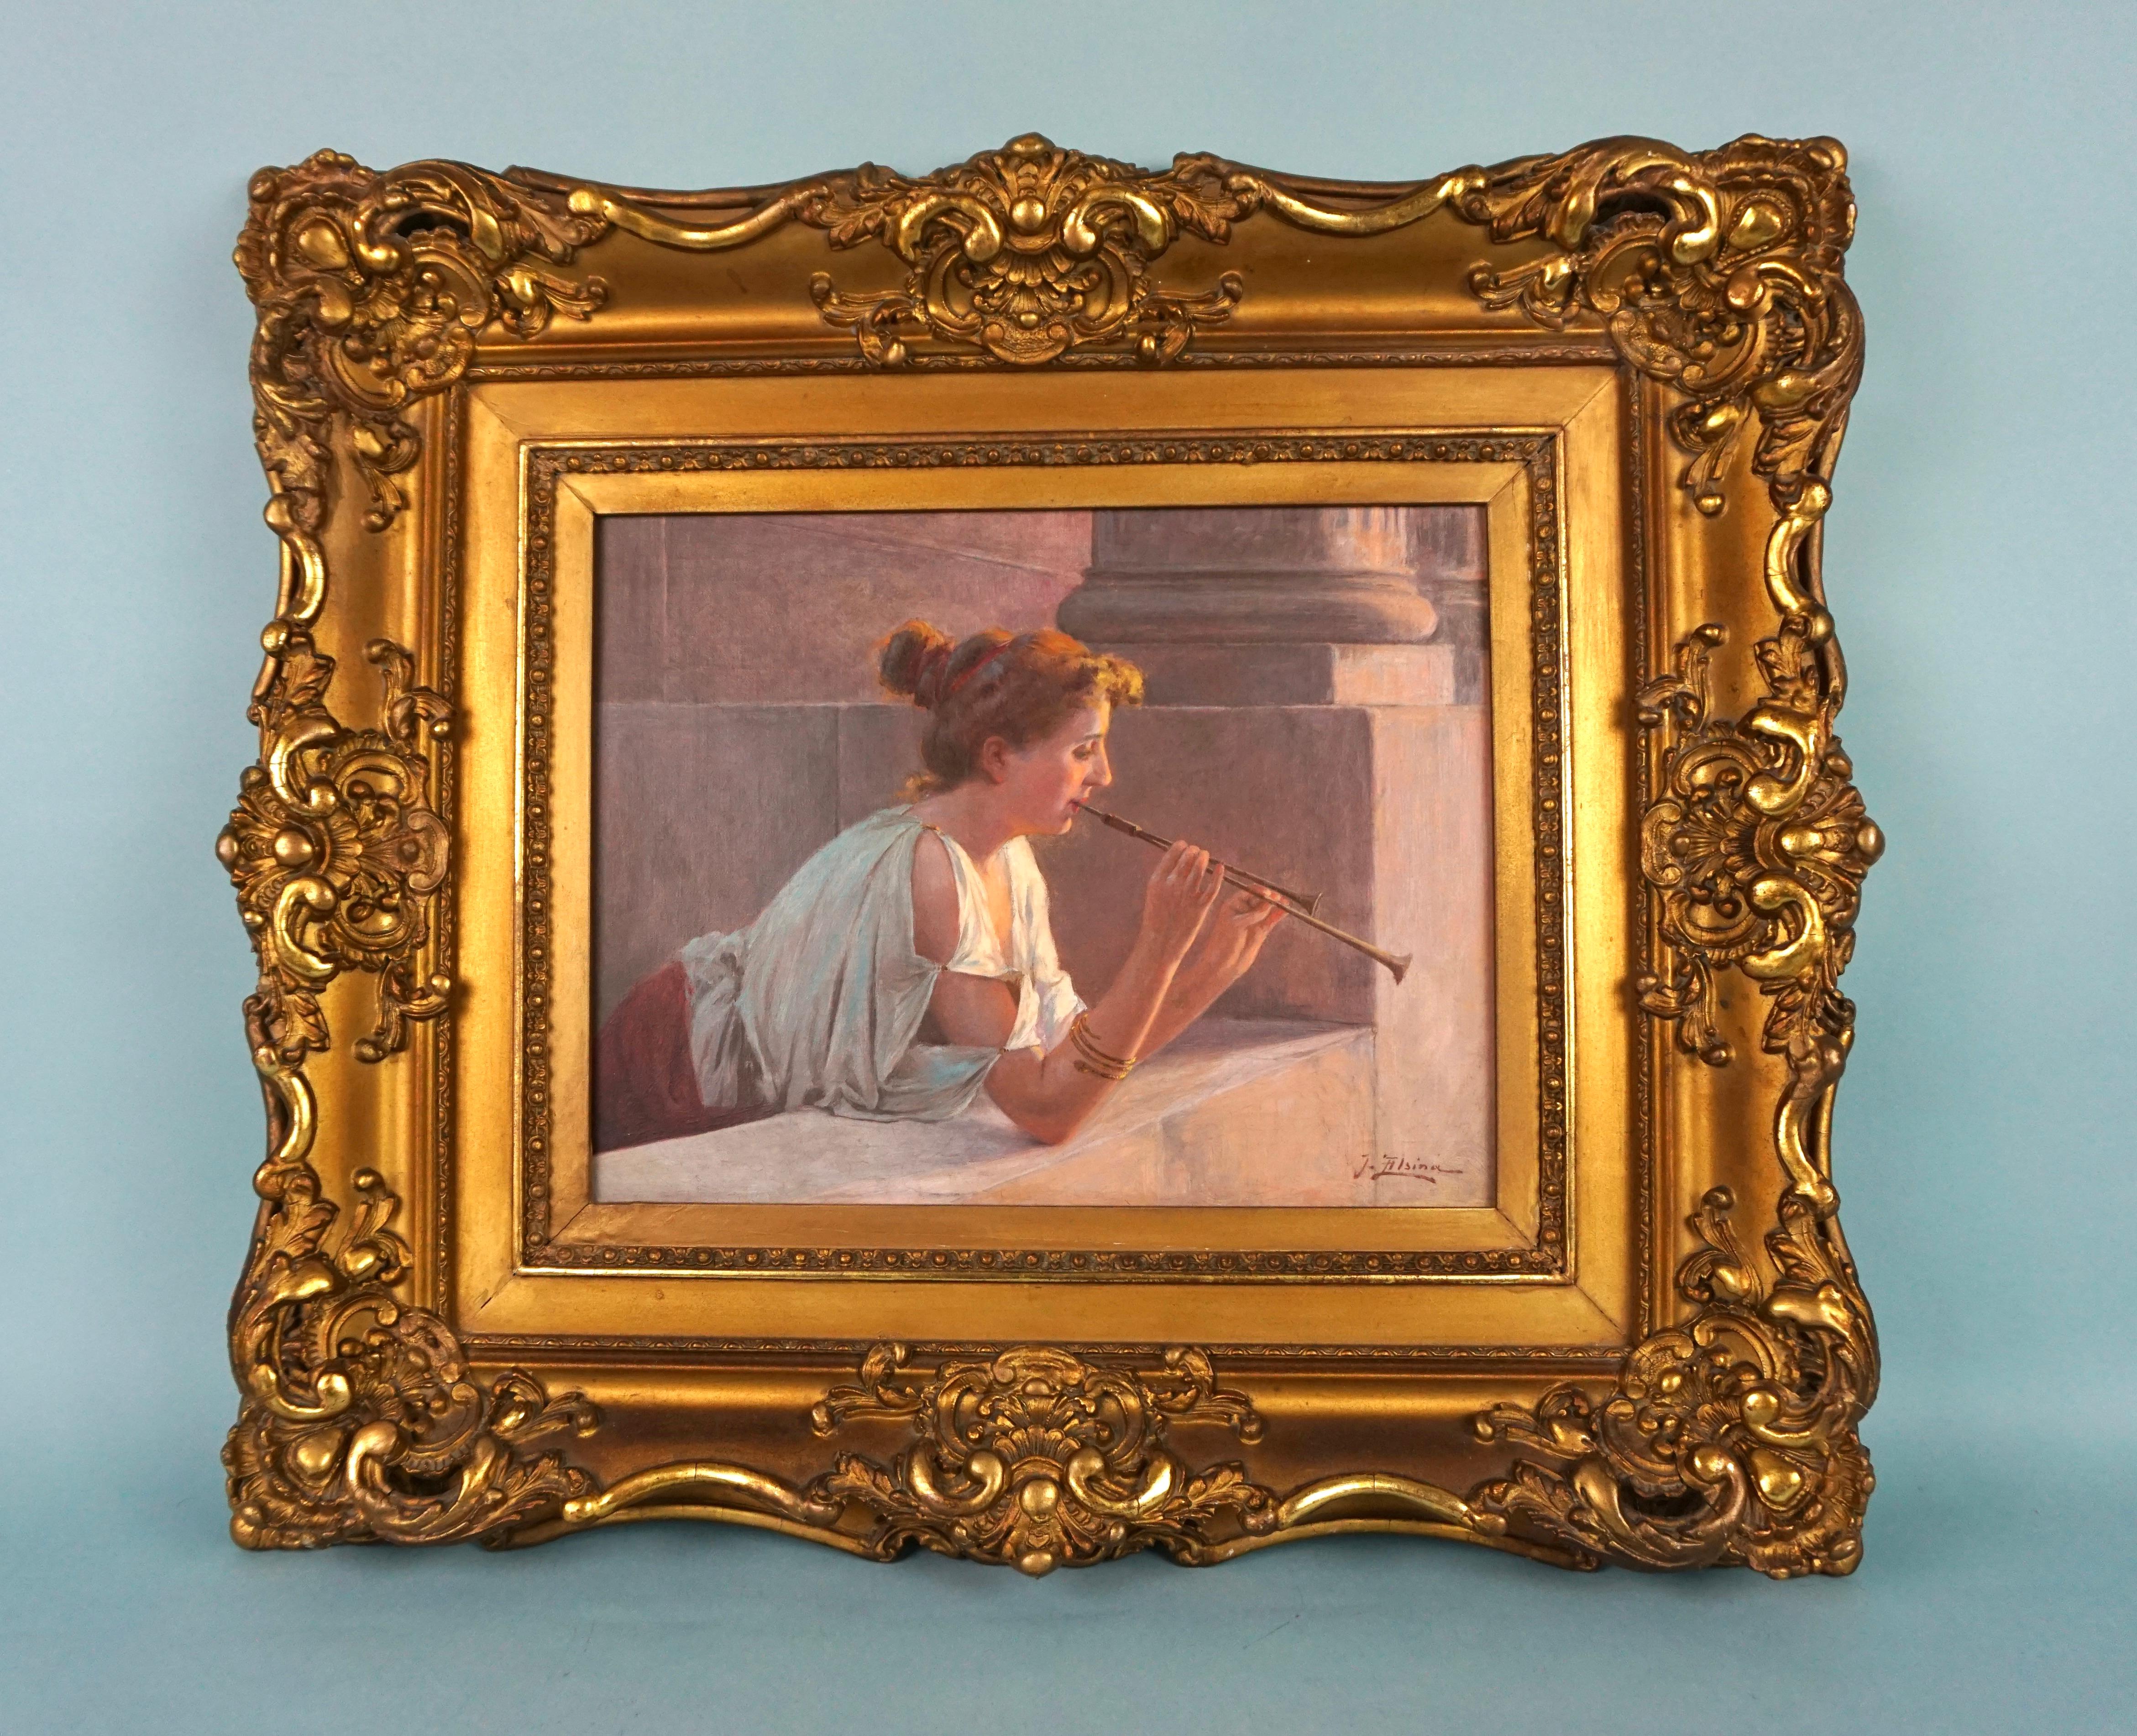 A very attractive oil on canvas by Jacques Alsina, a well listed nineteenth century French artist. This elegant delicate work depicts a young woman in a restive pose playing the flute. Appears to retain its original giltwood frame. A pleasing good